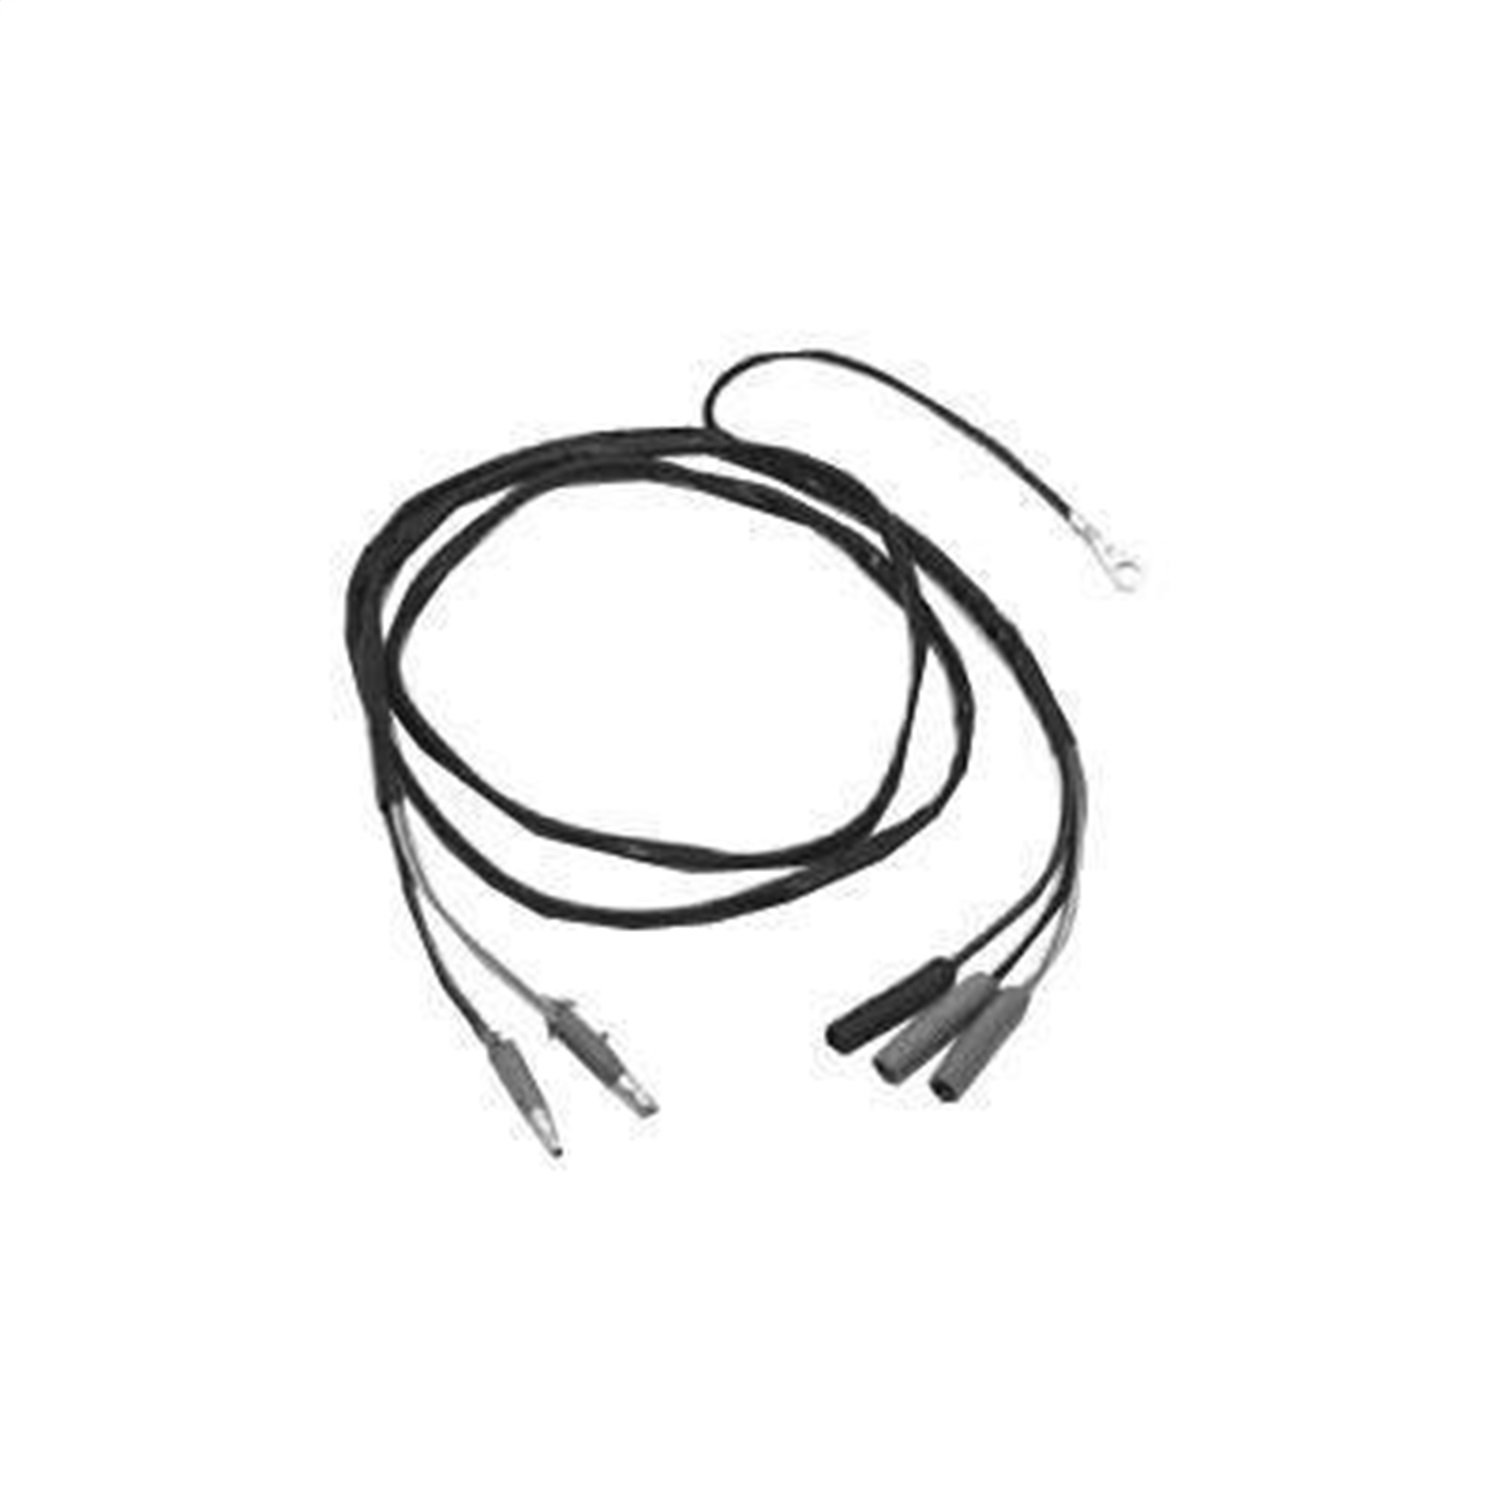 Console Feed Harness 1964-1966 Ford Mustang